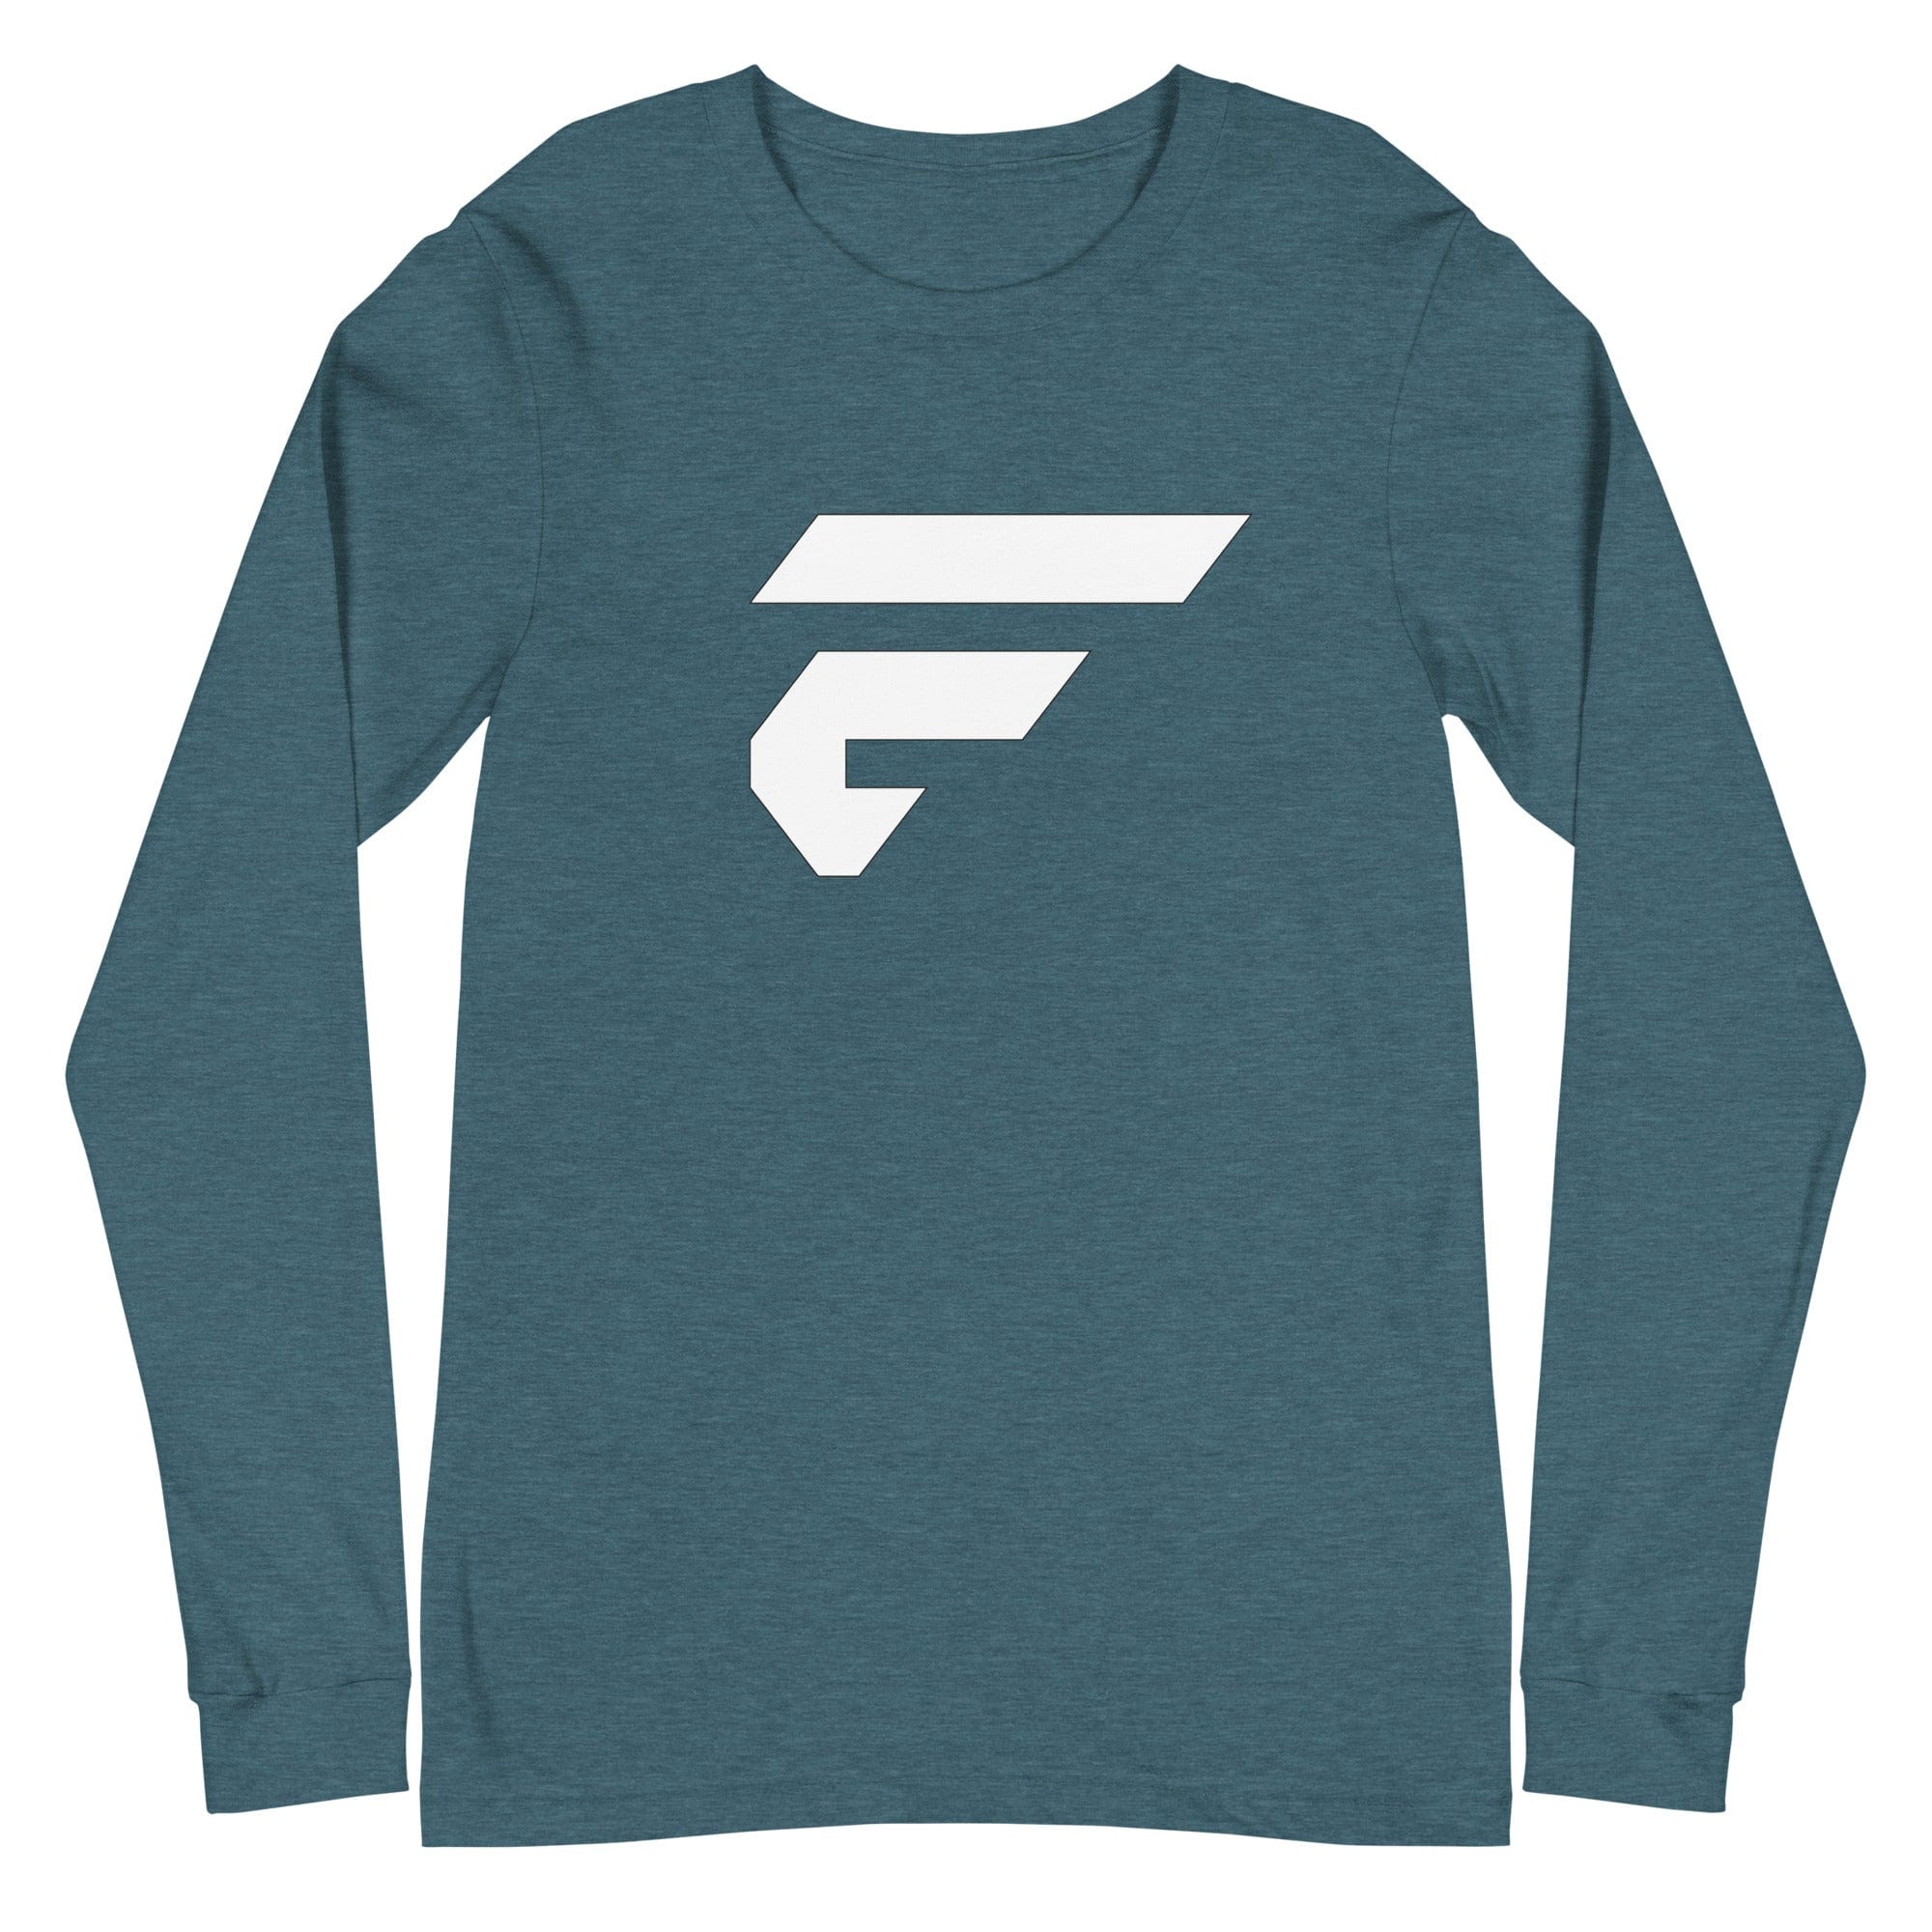 Heathered teal unisex cotton longsleeve shirt with Fire Cornhole F logo in white